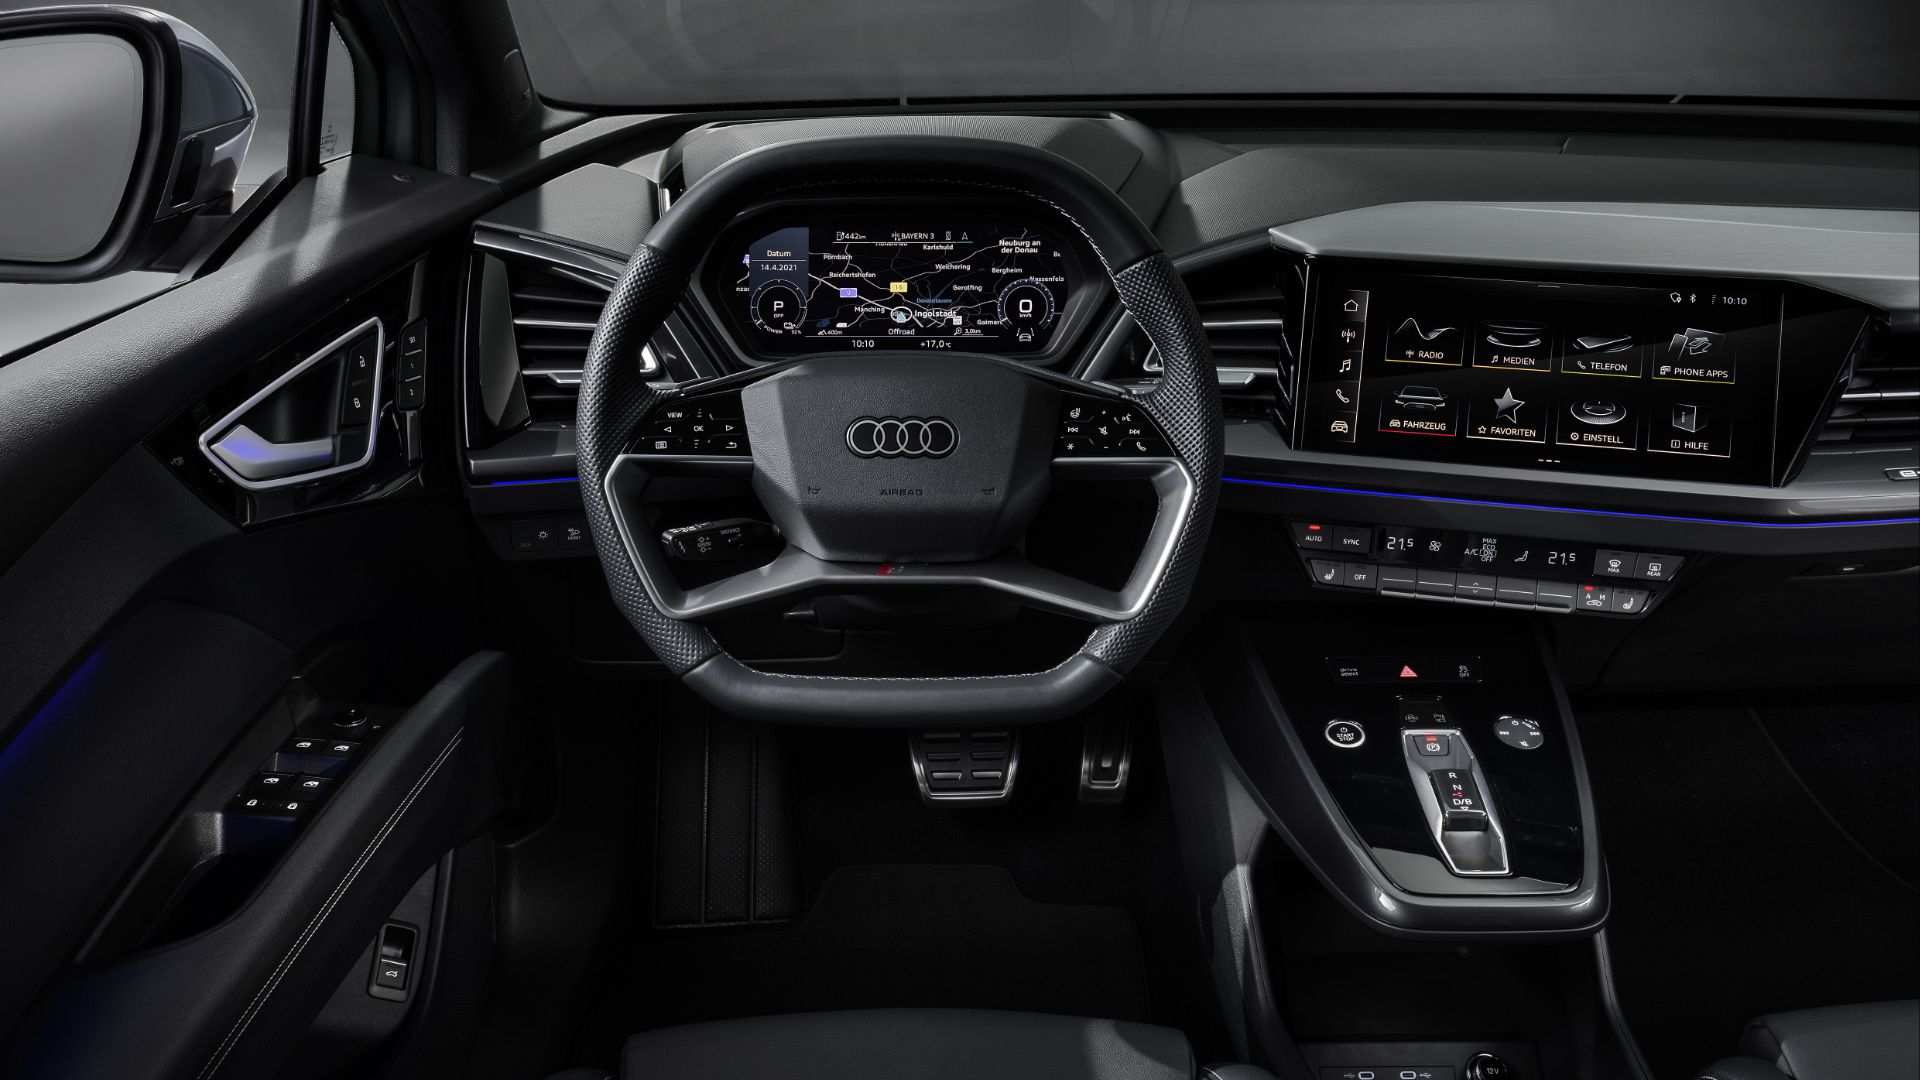 Audi Q4 e-tron: Aesthetic and Spacious with Premium Technology